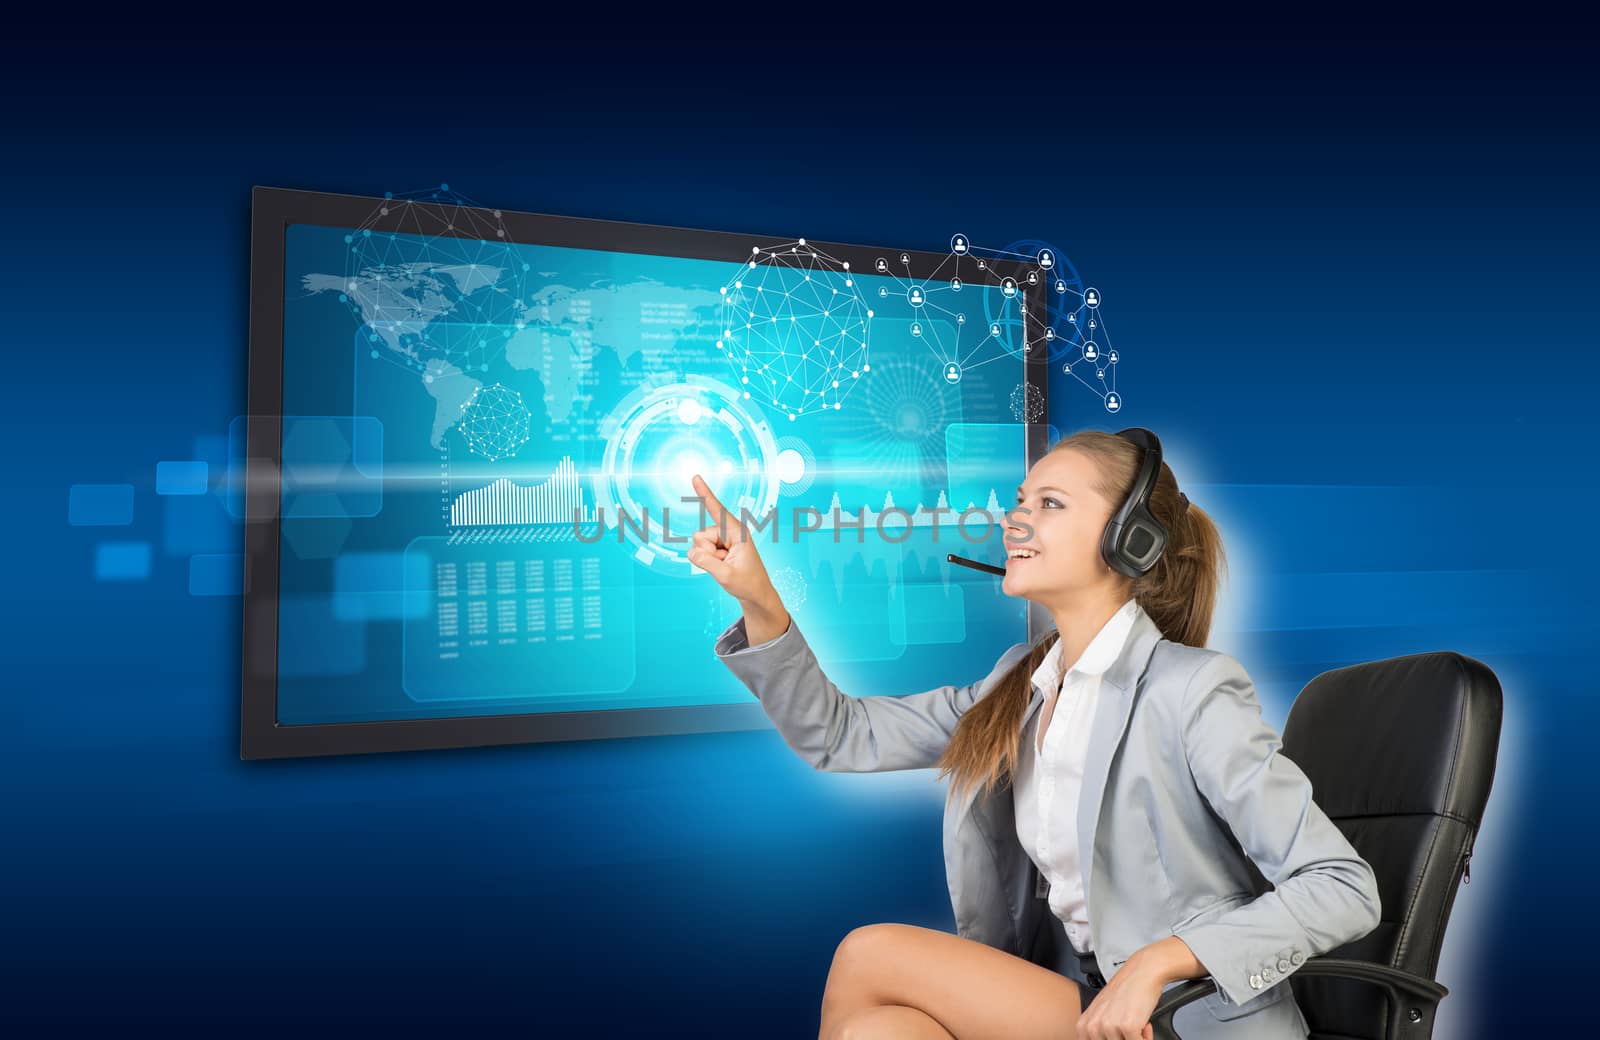 Businesswoman in headset using touch screen interface with world map, graphs and other elements, on blue background